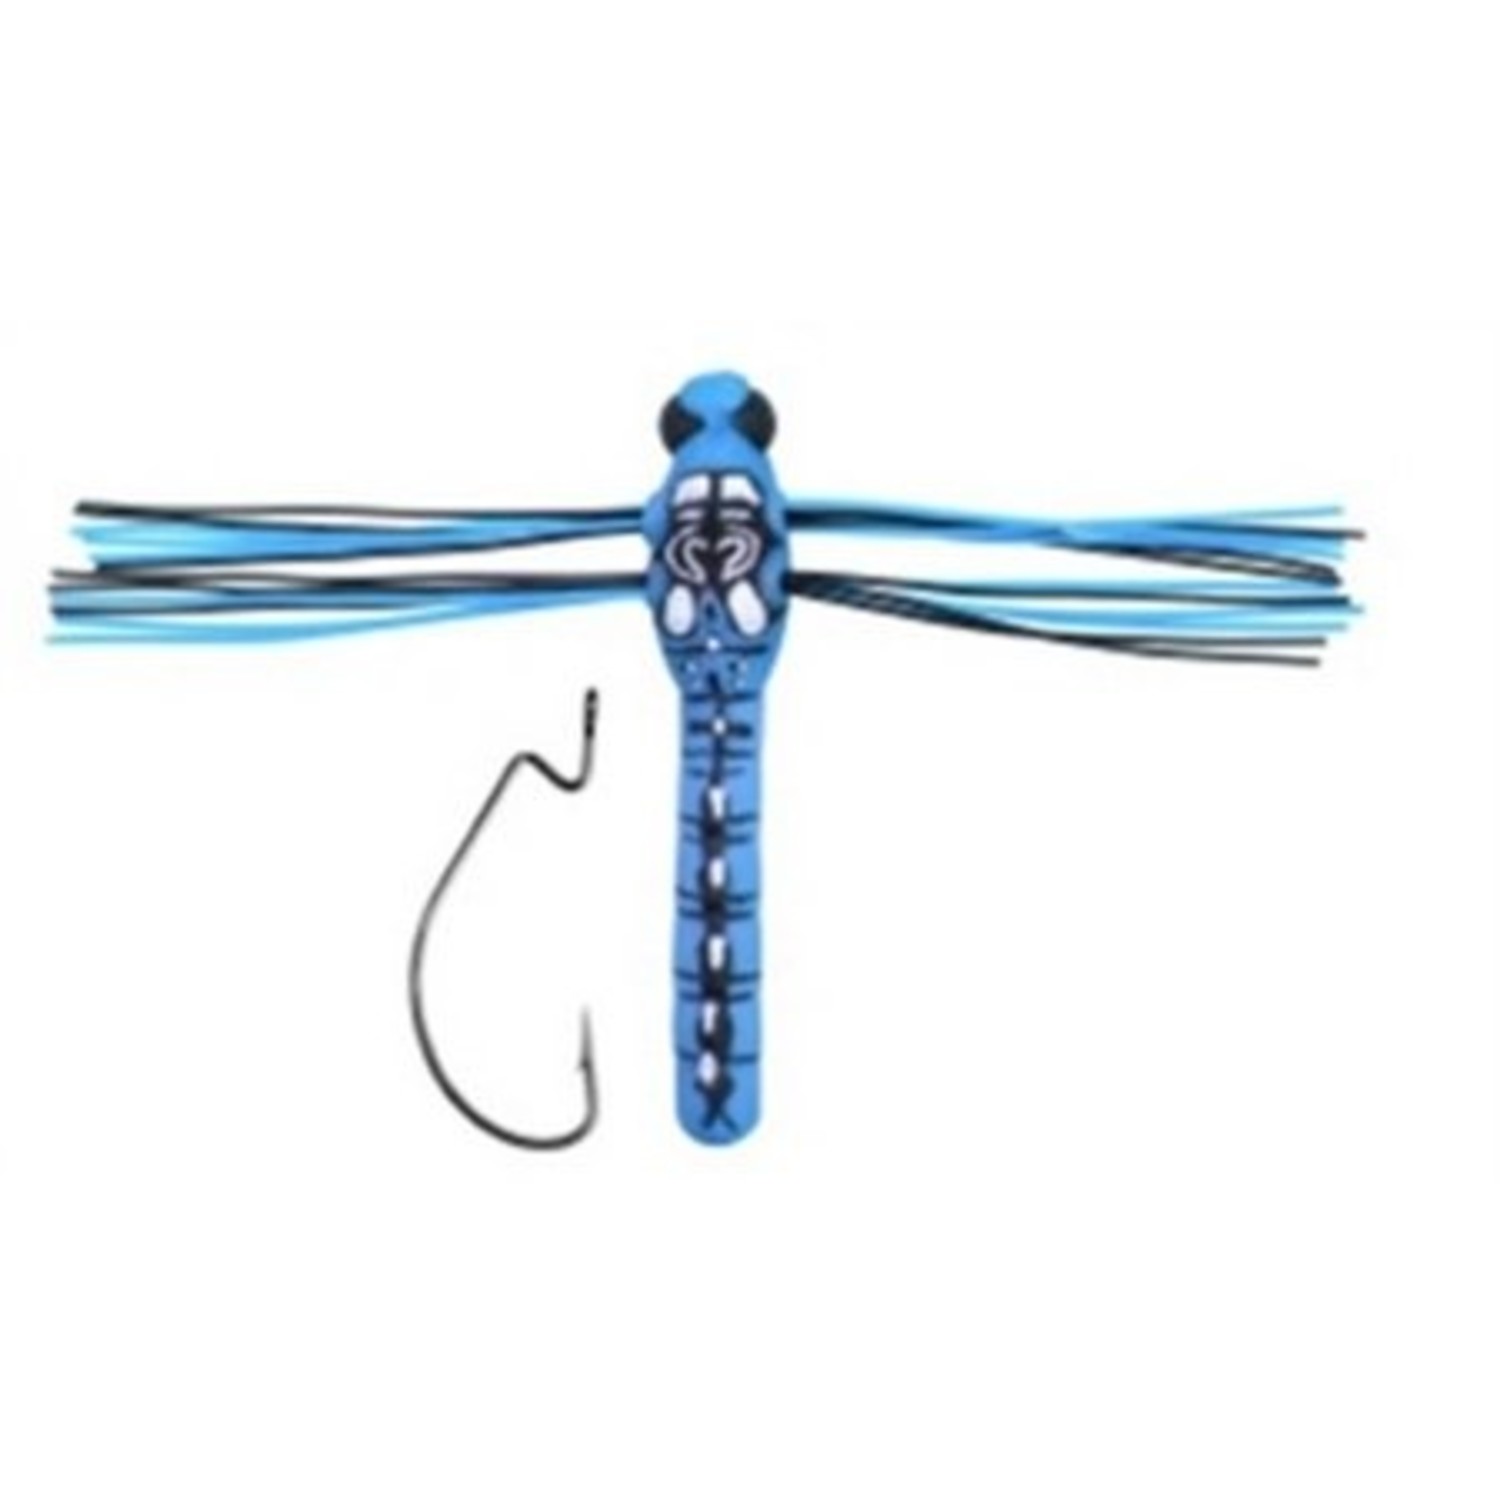 Lunkerhunt dragonfly dasher - OutfitterSSM